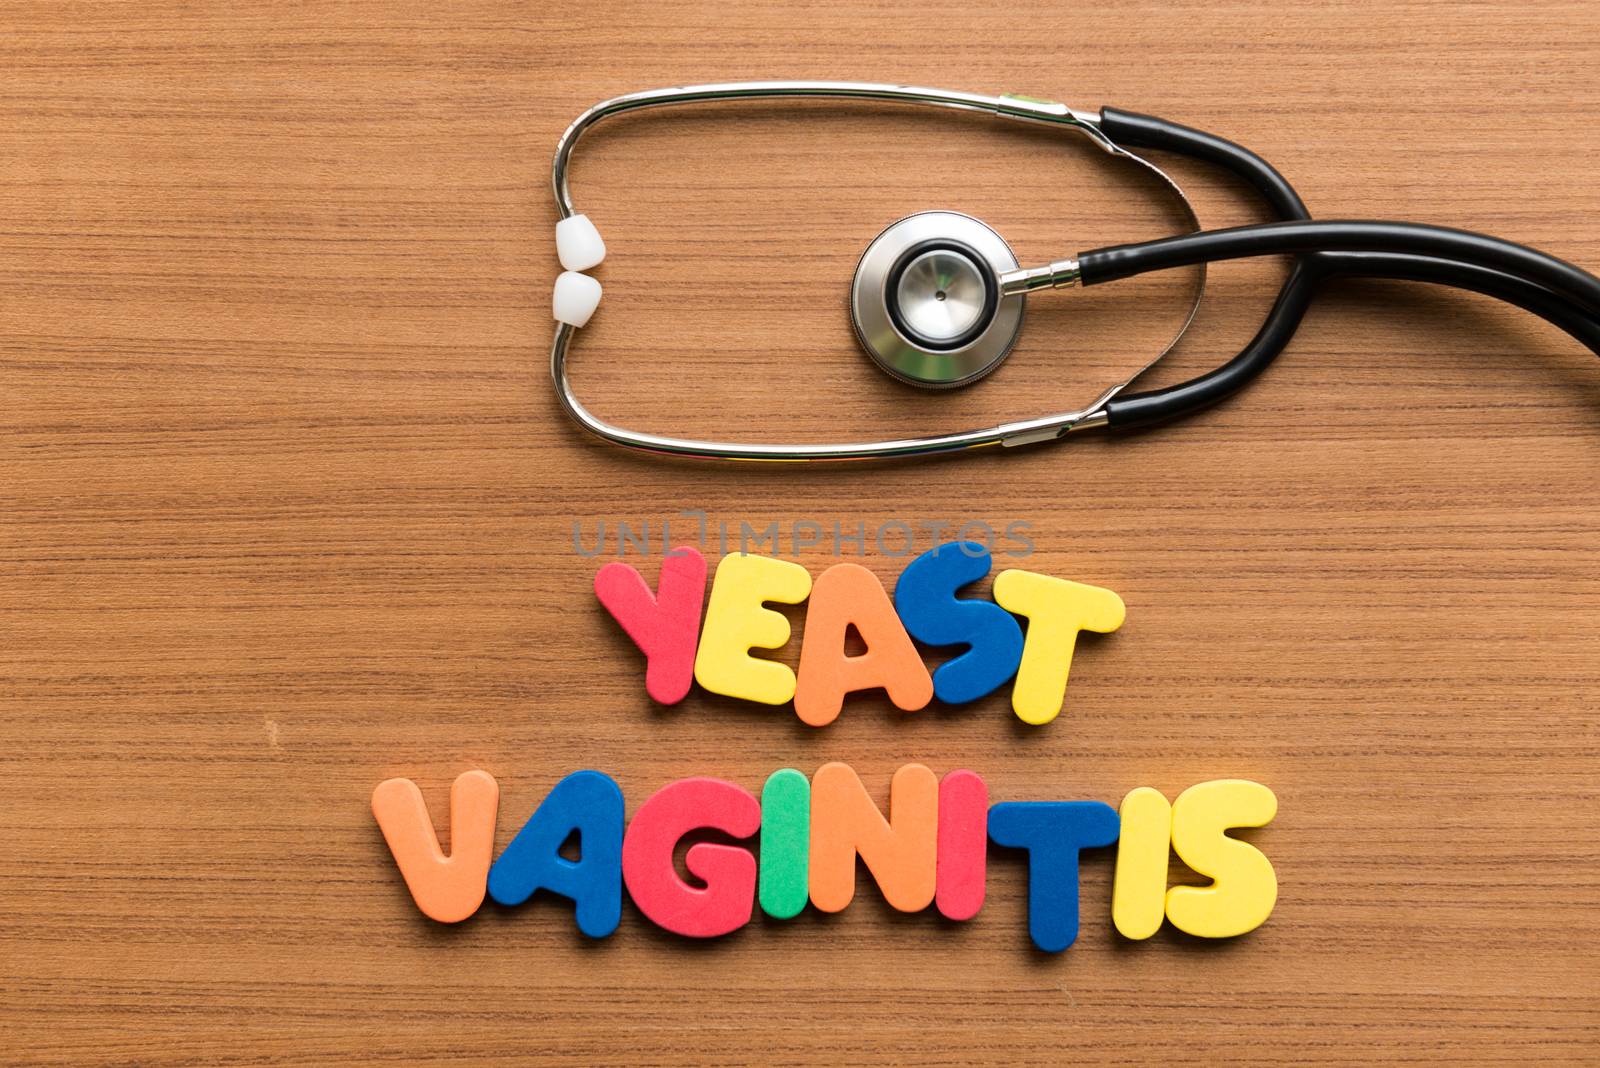 yeast vaginitis colorful word with stethoscope on wooden background